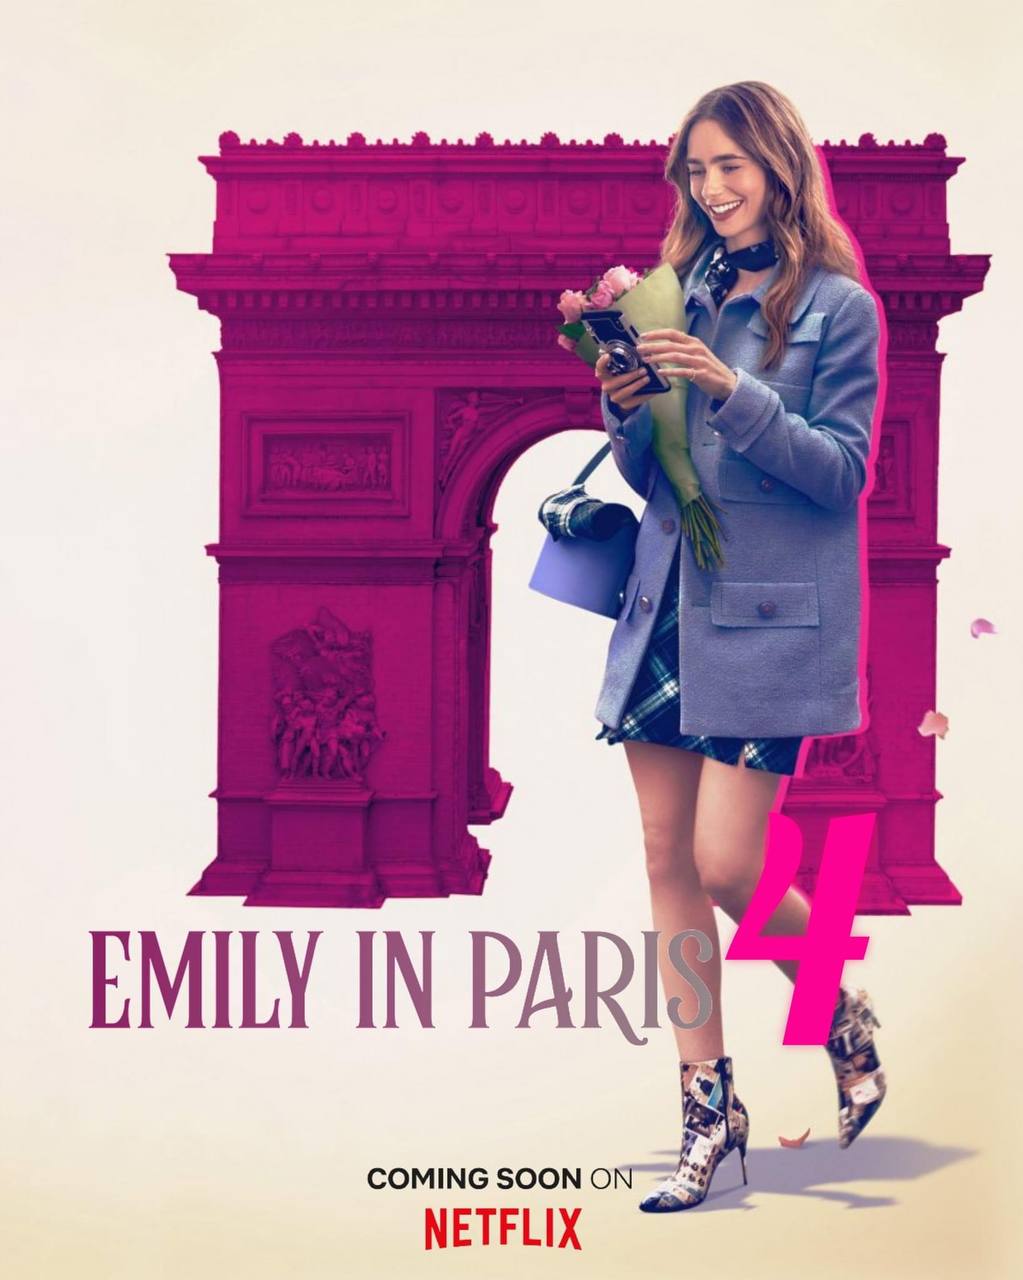 Emily in Paris Season 4: Emily in Paris Season 4 release date on